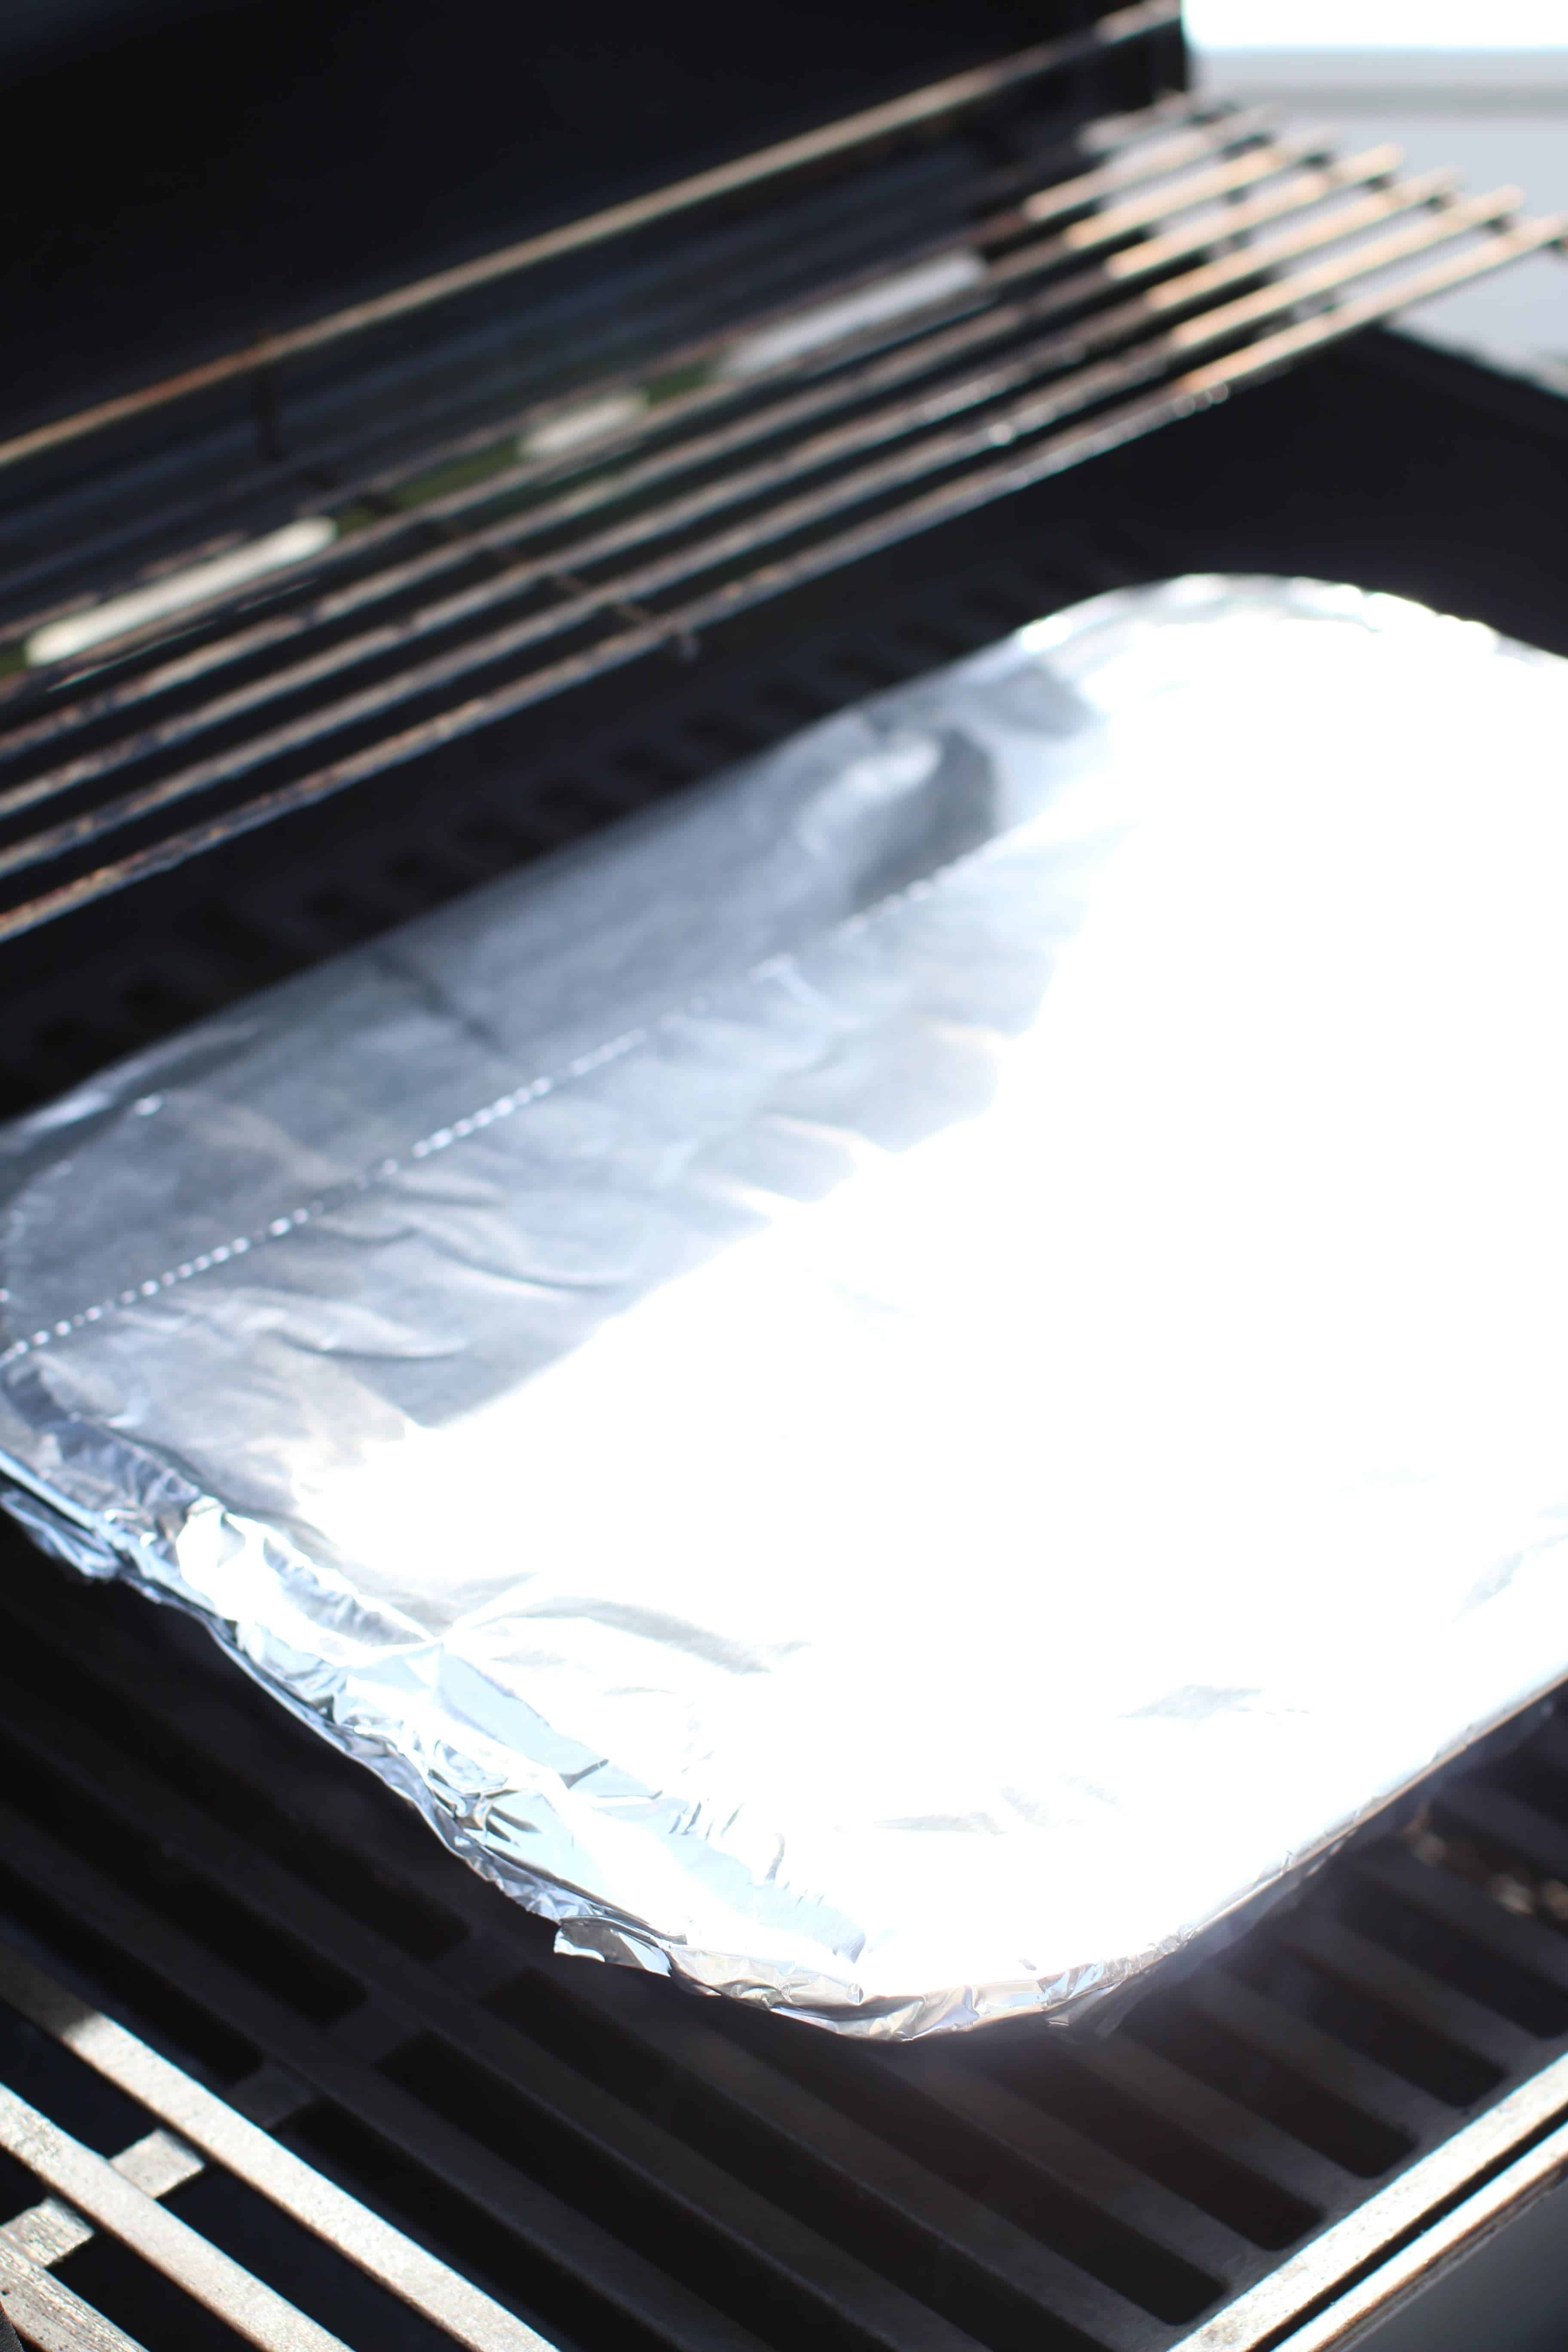 a covered aluminum foil pan showed on the grate of a gas grill.